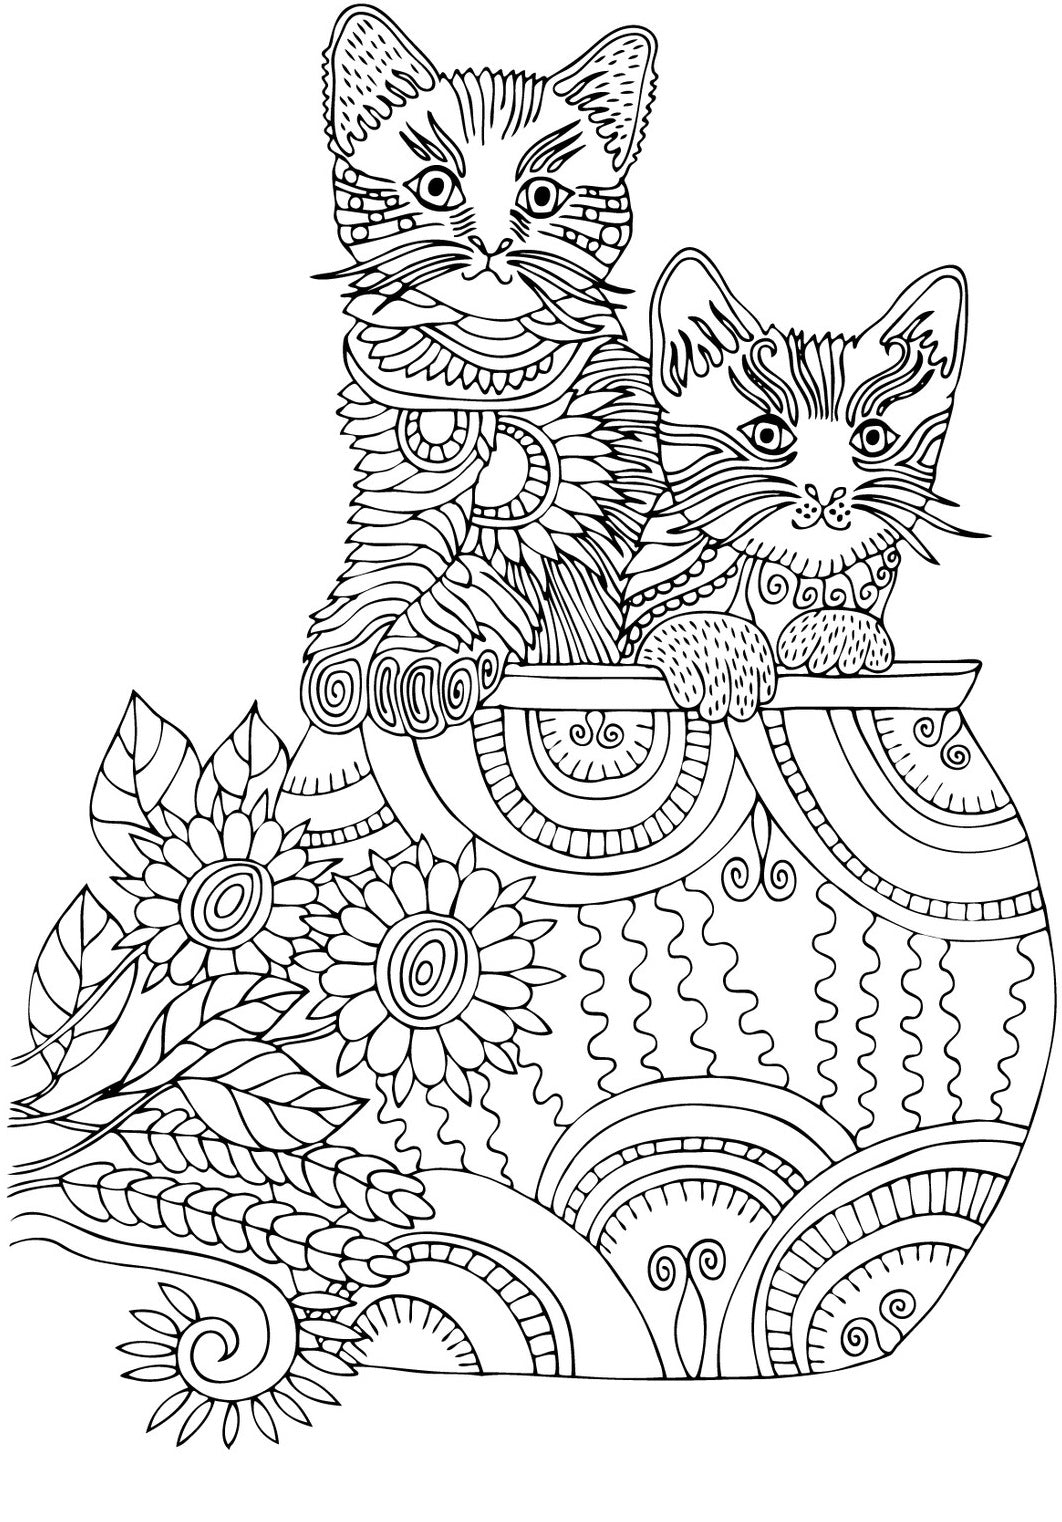 Kitty Cat - Cute Cats & Kittens, PDF Coloring Book